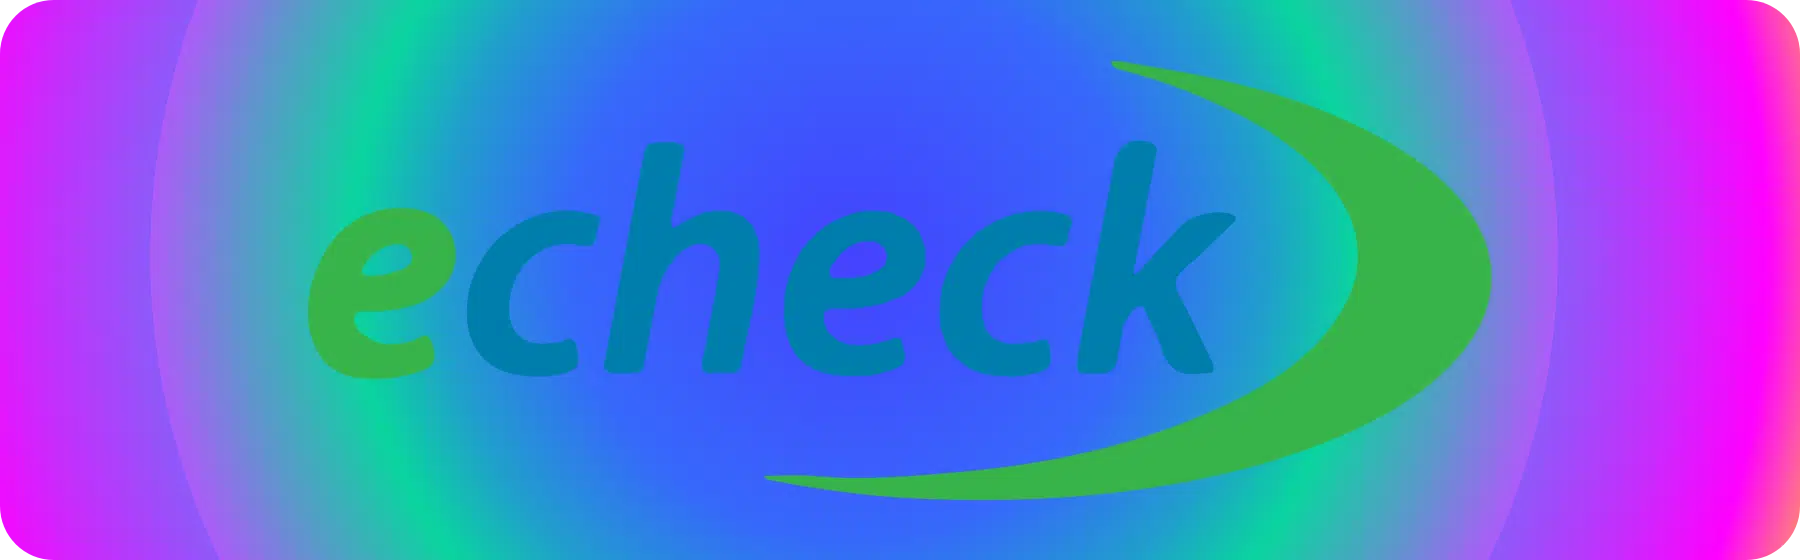 picture with echeck logo